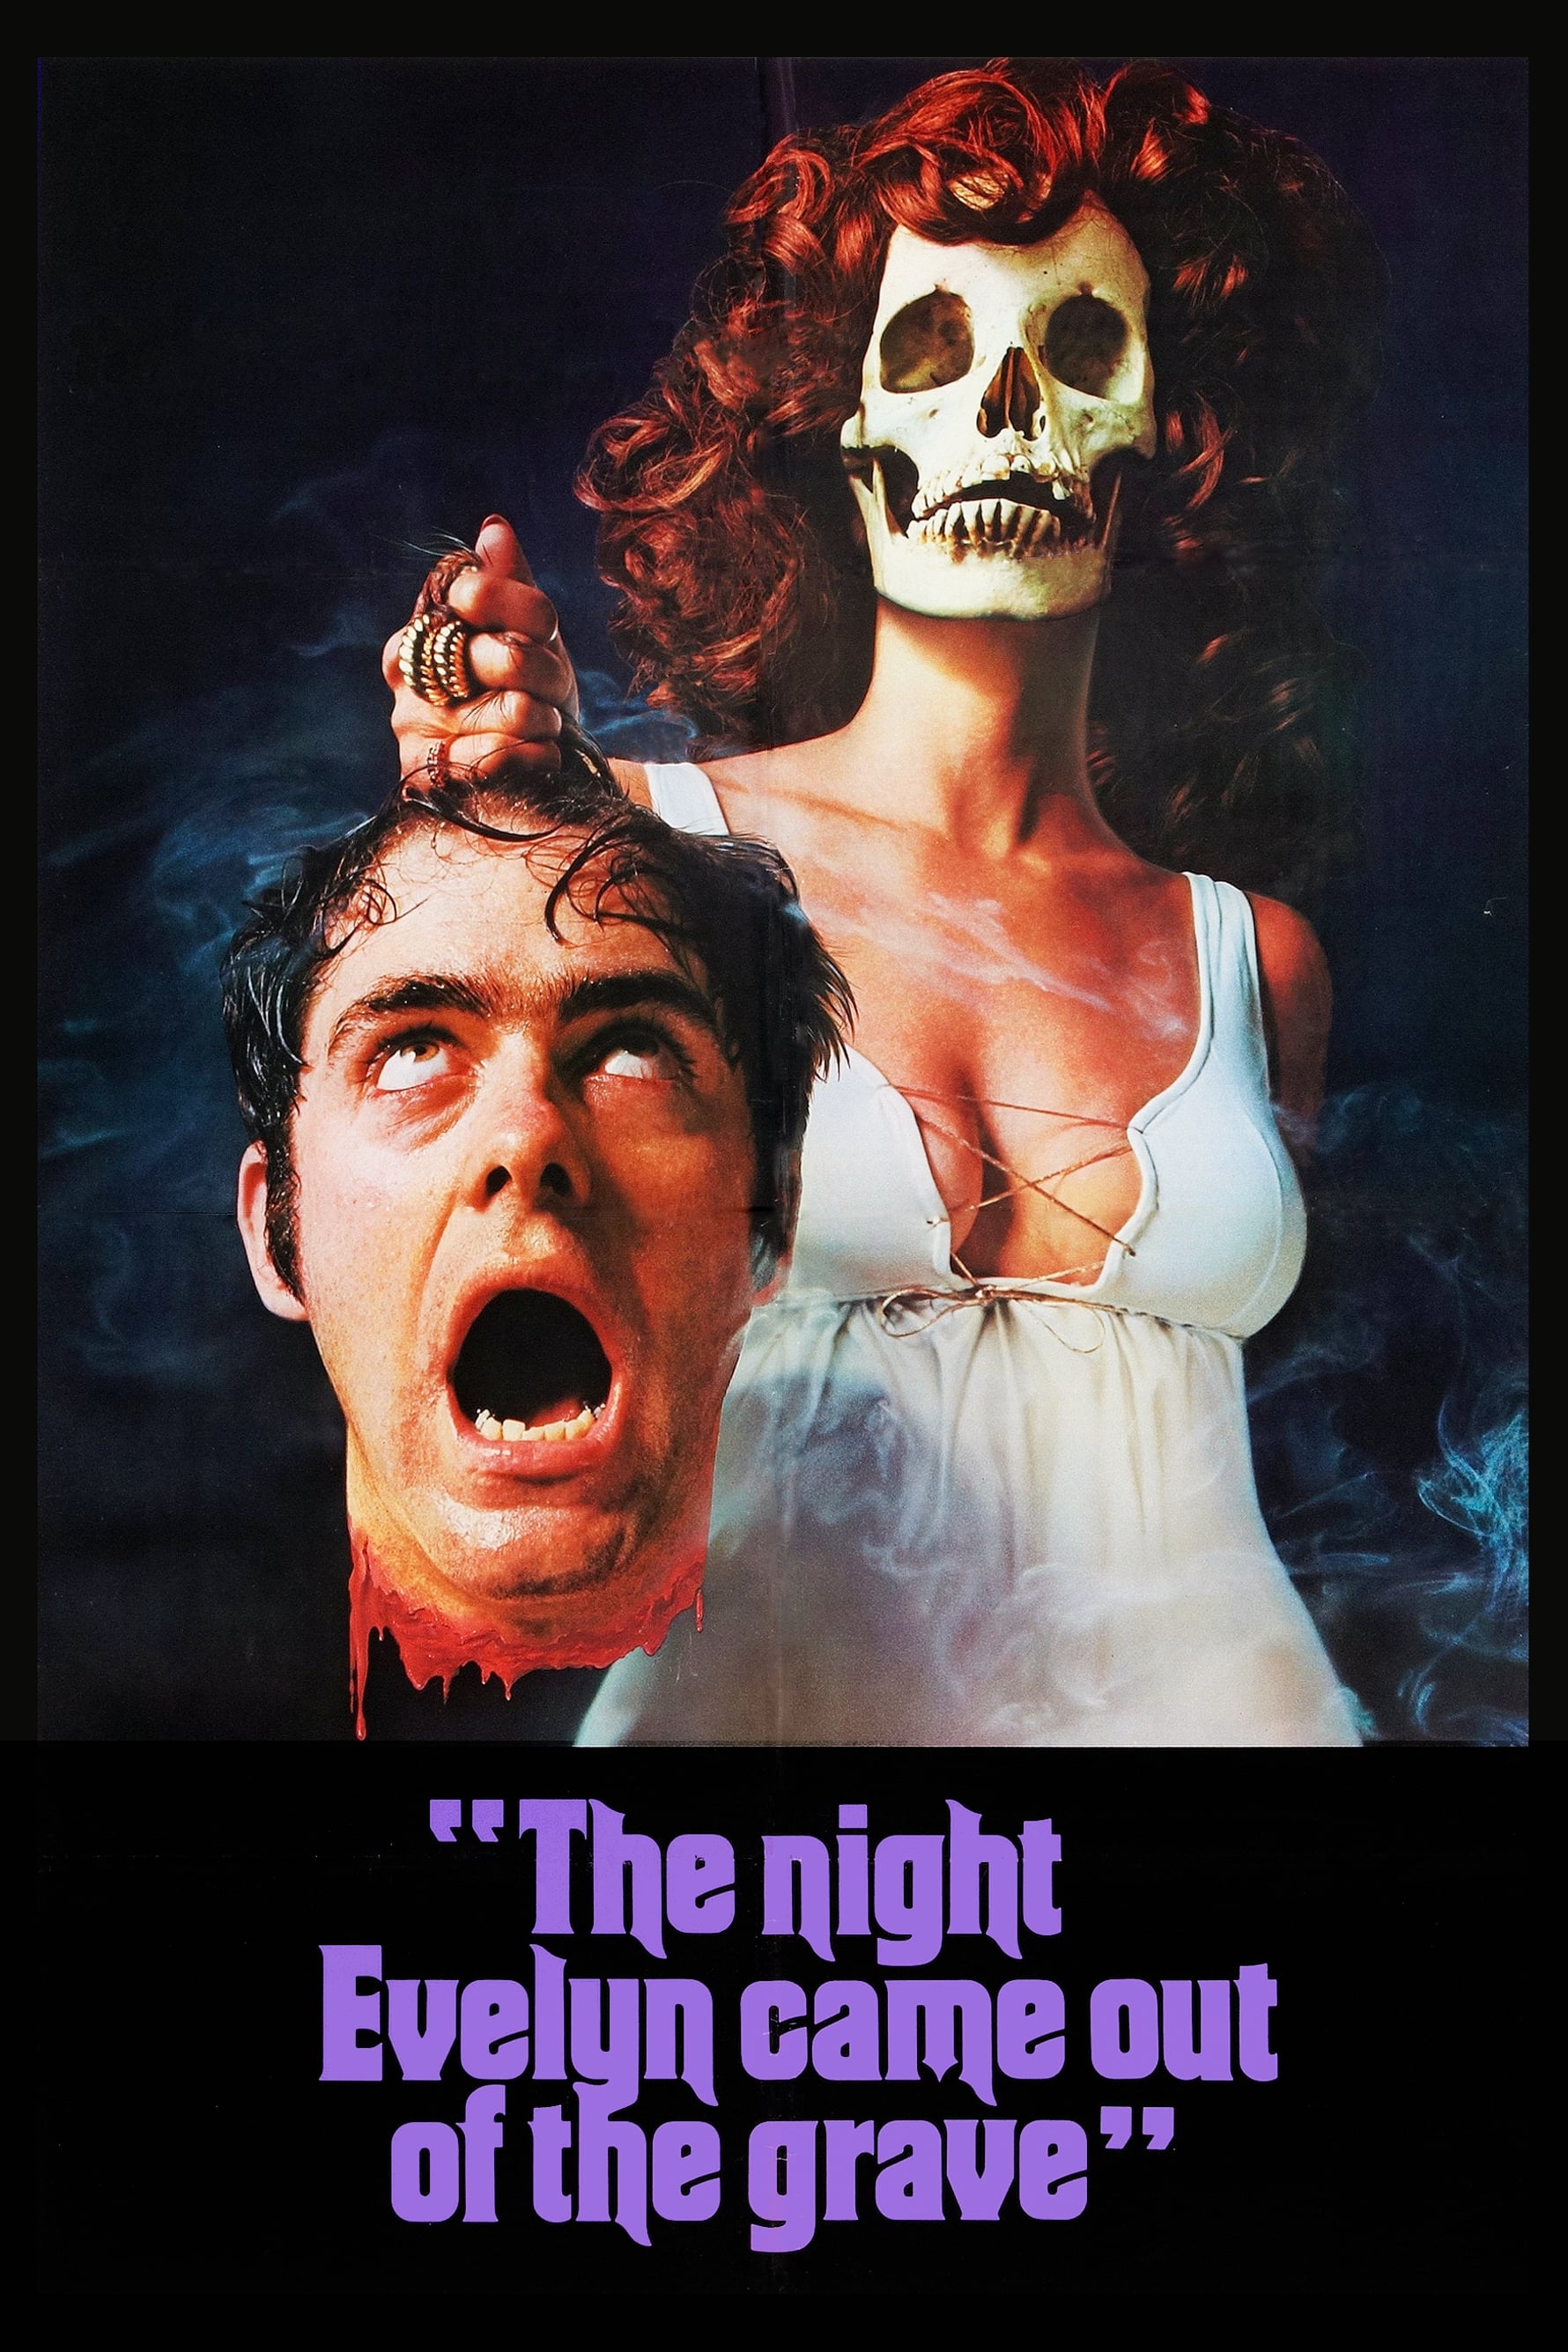 The Night Evelyn Came Out of the Grave (1971)